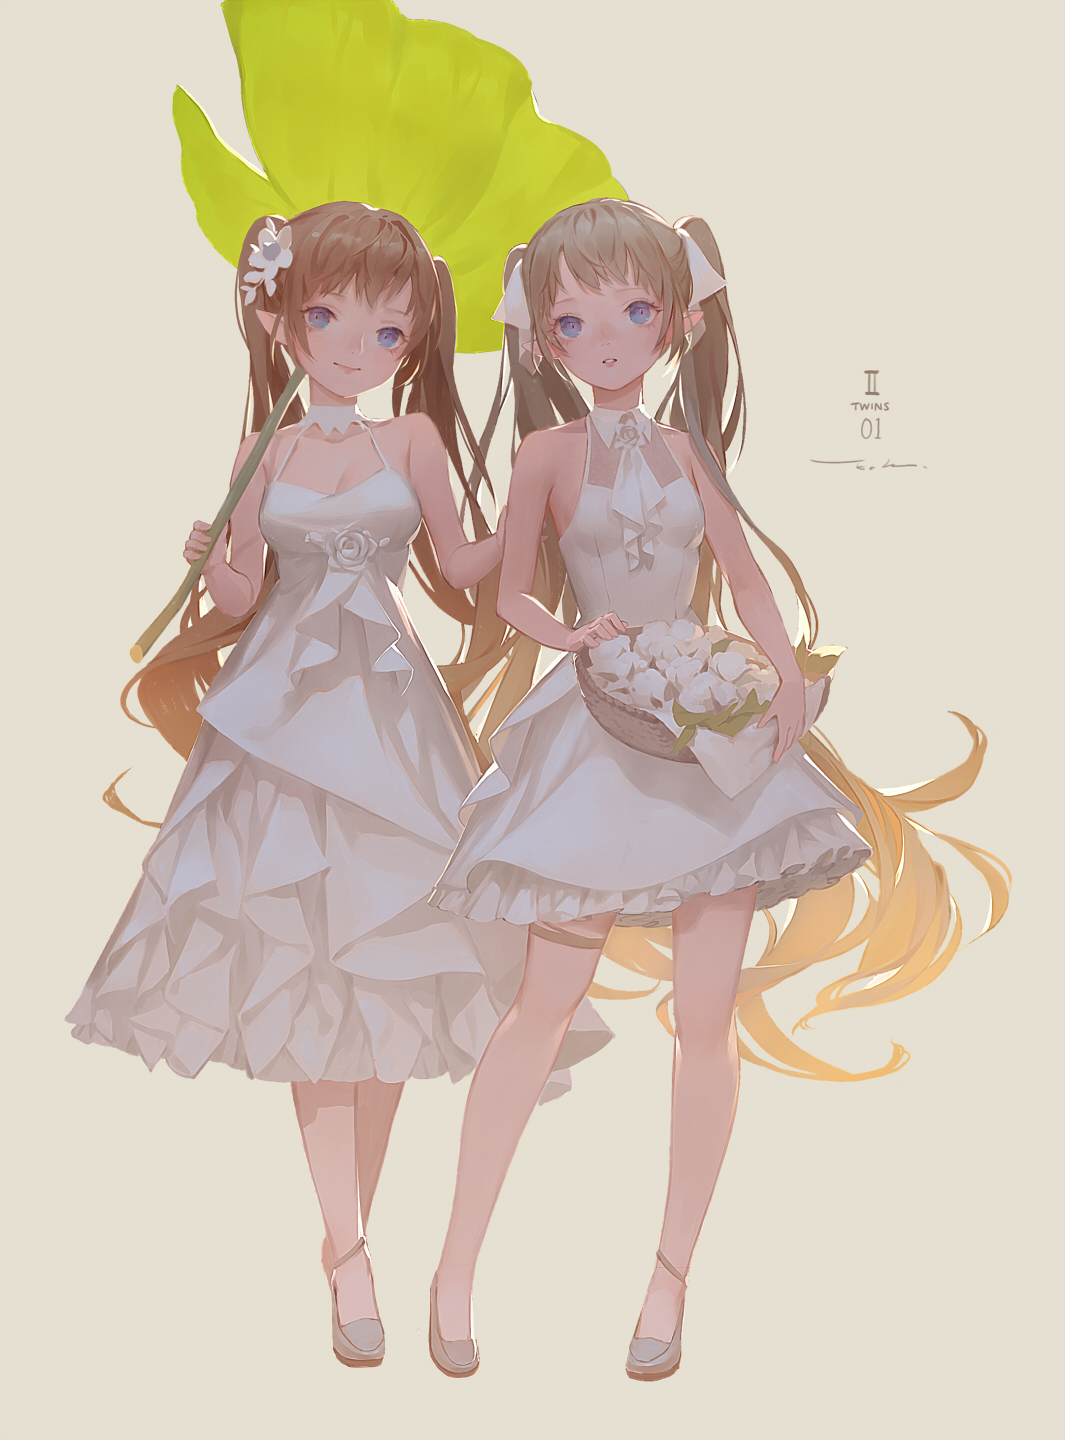 Anime 1065x1440 anime anime girls blue eyes simple background dress brunette twintails twins pointy ears Echosdoodle original characters